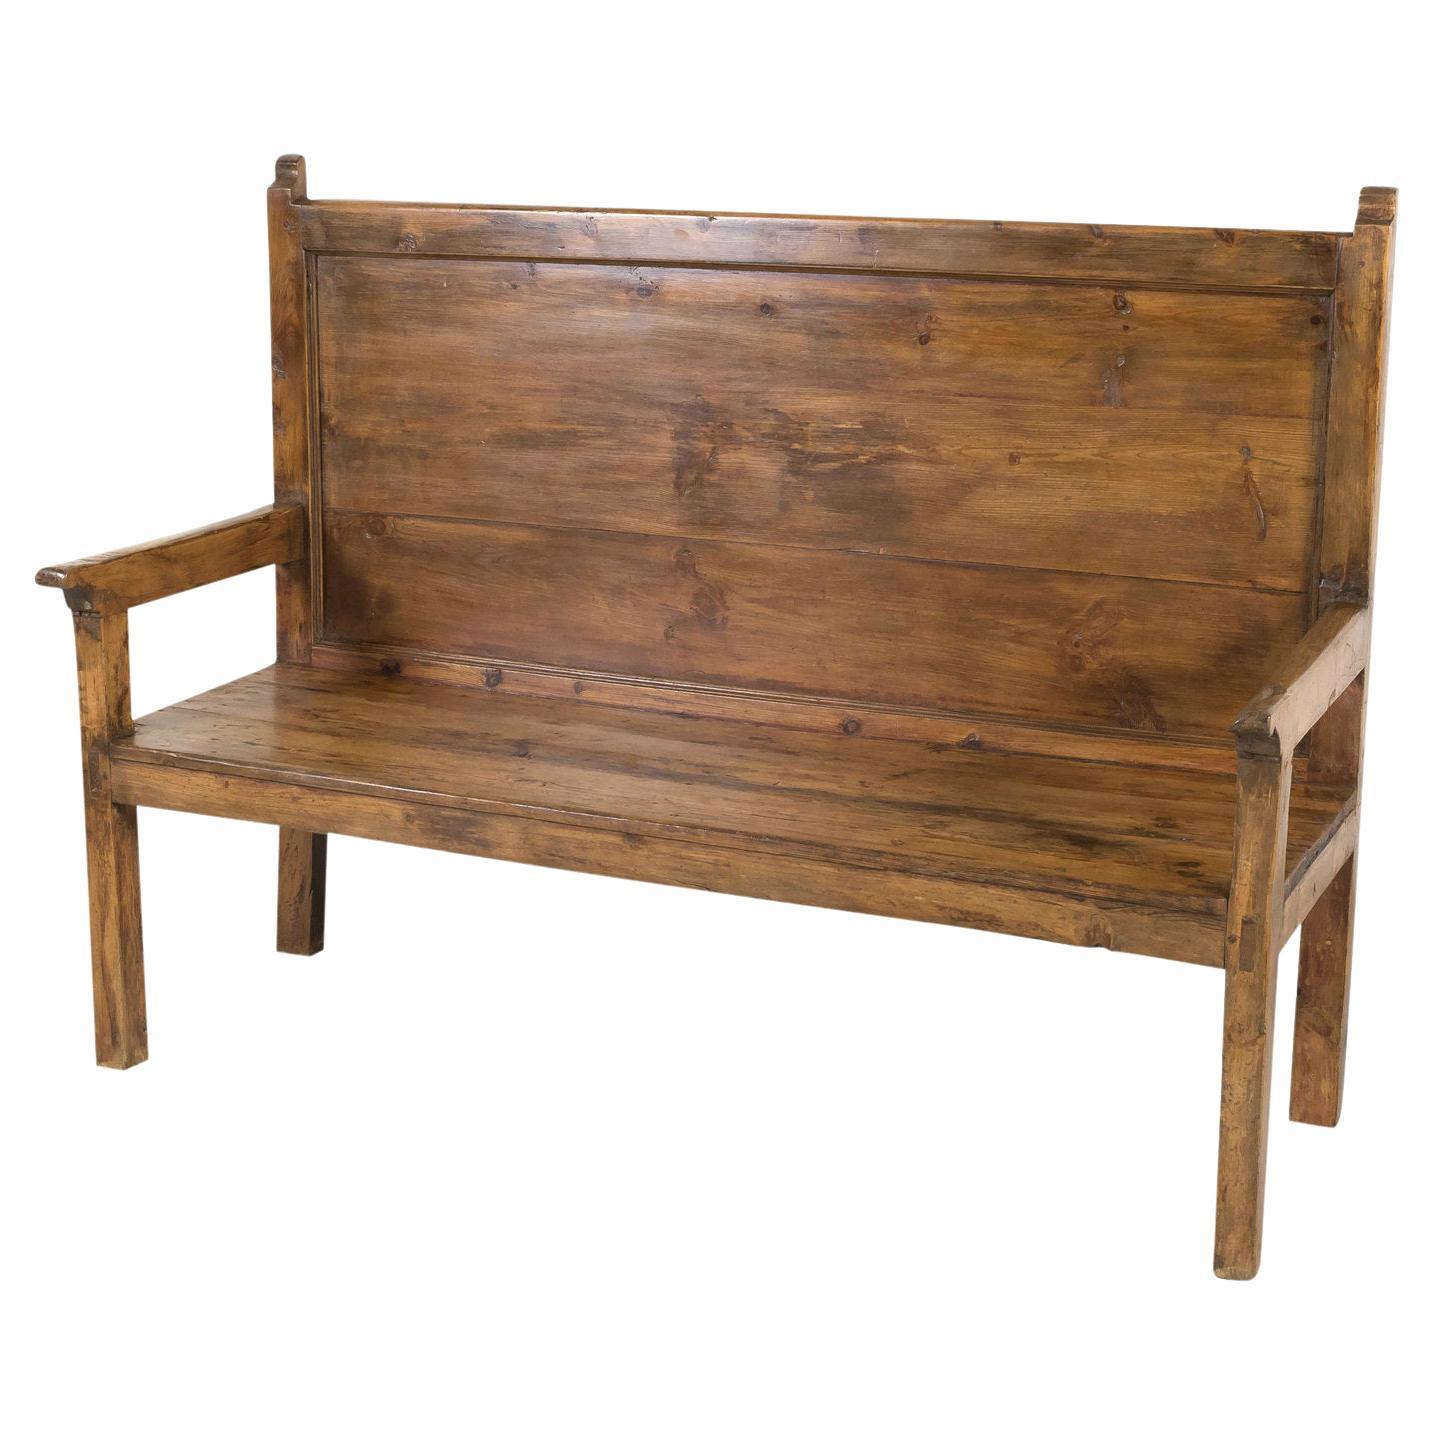 19th Century Rustic Spanish Colonial Pine Hall Bench with Arms